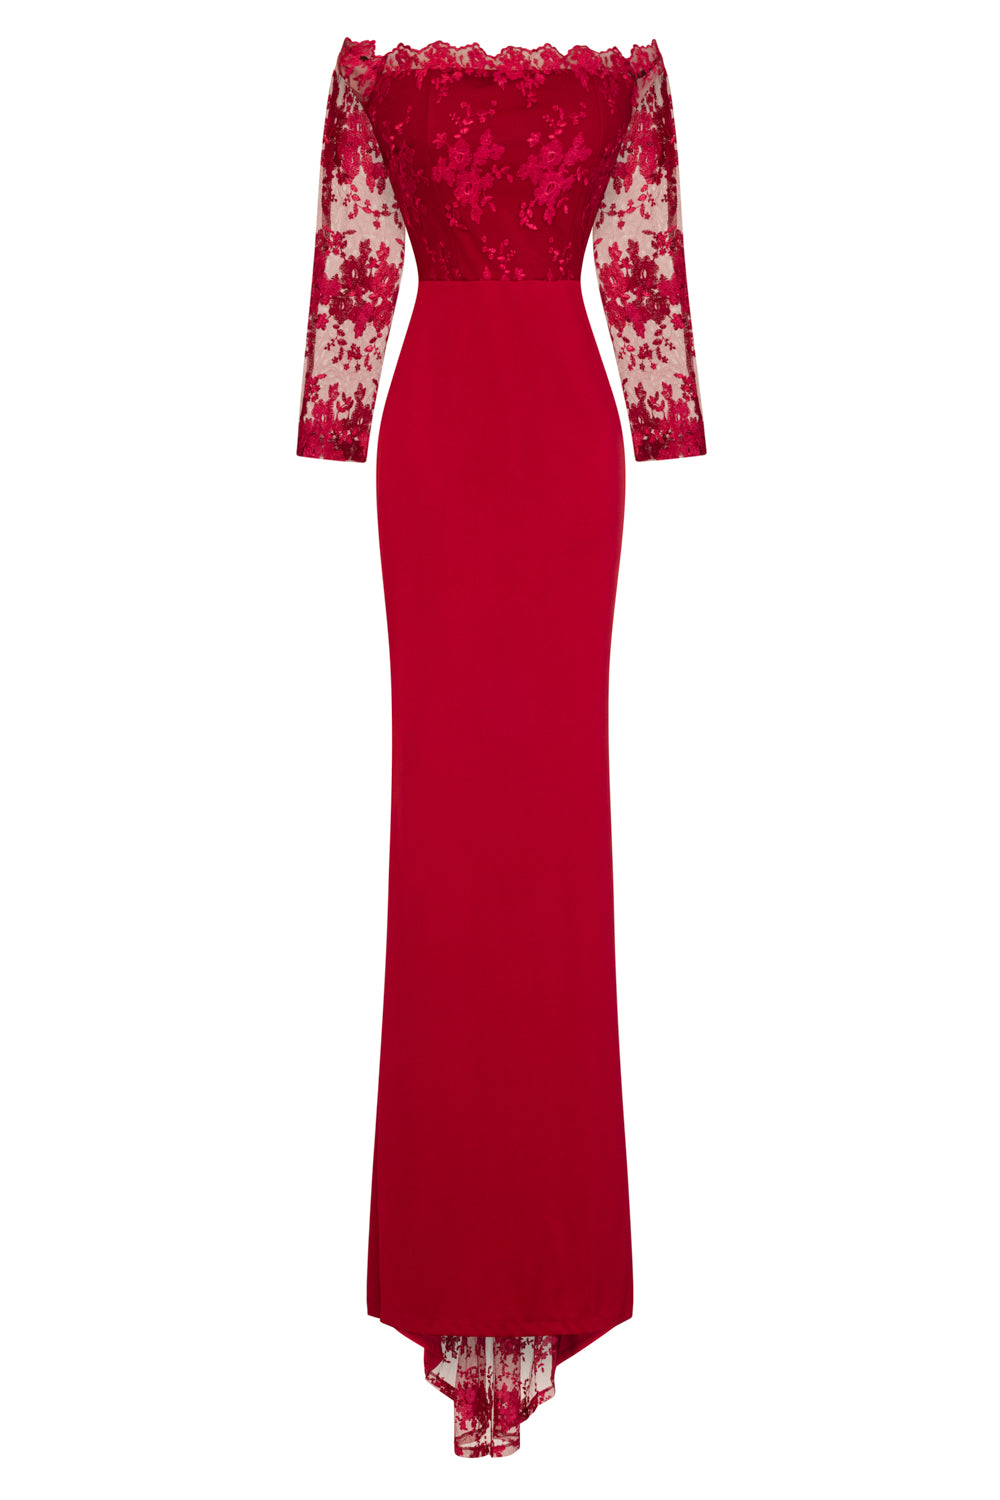 Meghan Berry Red Off The Shoulder Bardot Lace Fishtail Maxi Dress